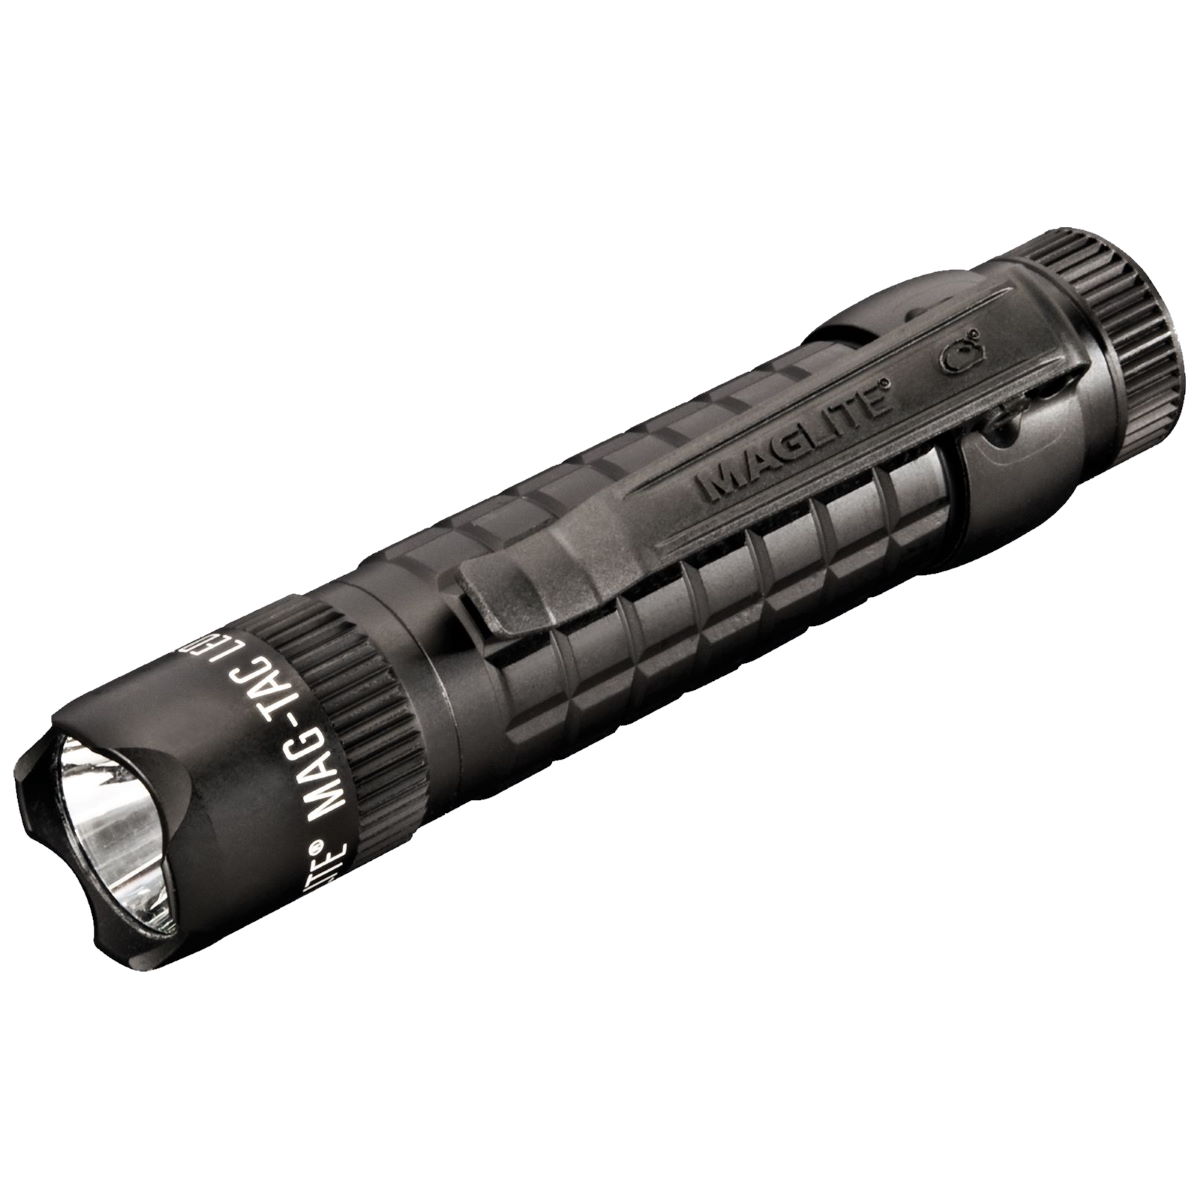 Maglite MAG-TAC Military Tactical LED Flashlight Torch 320 Lumens CR123 Battery